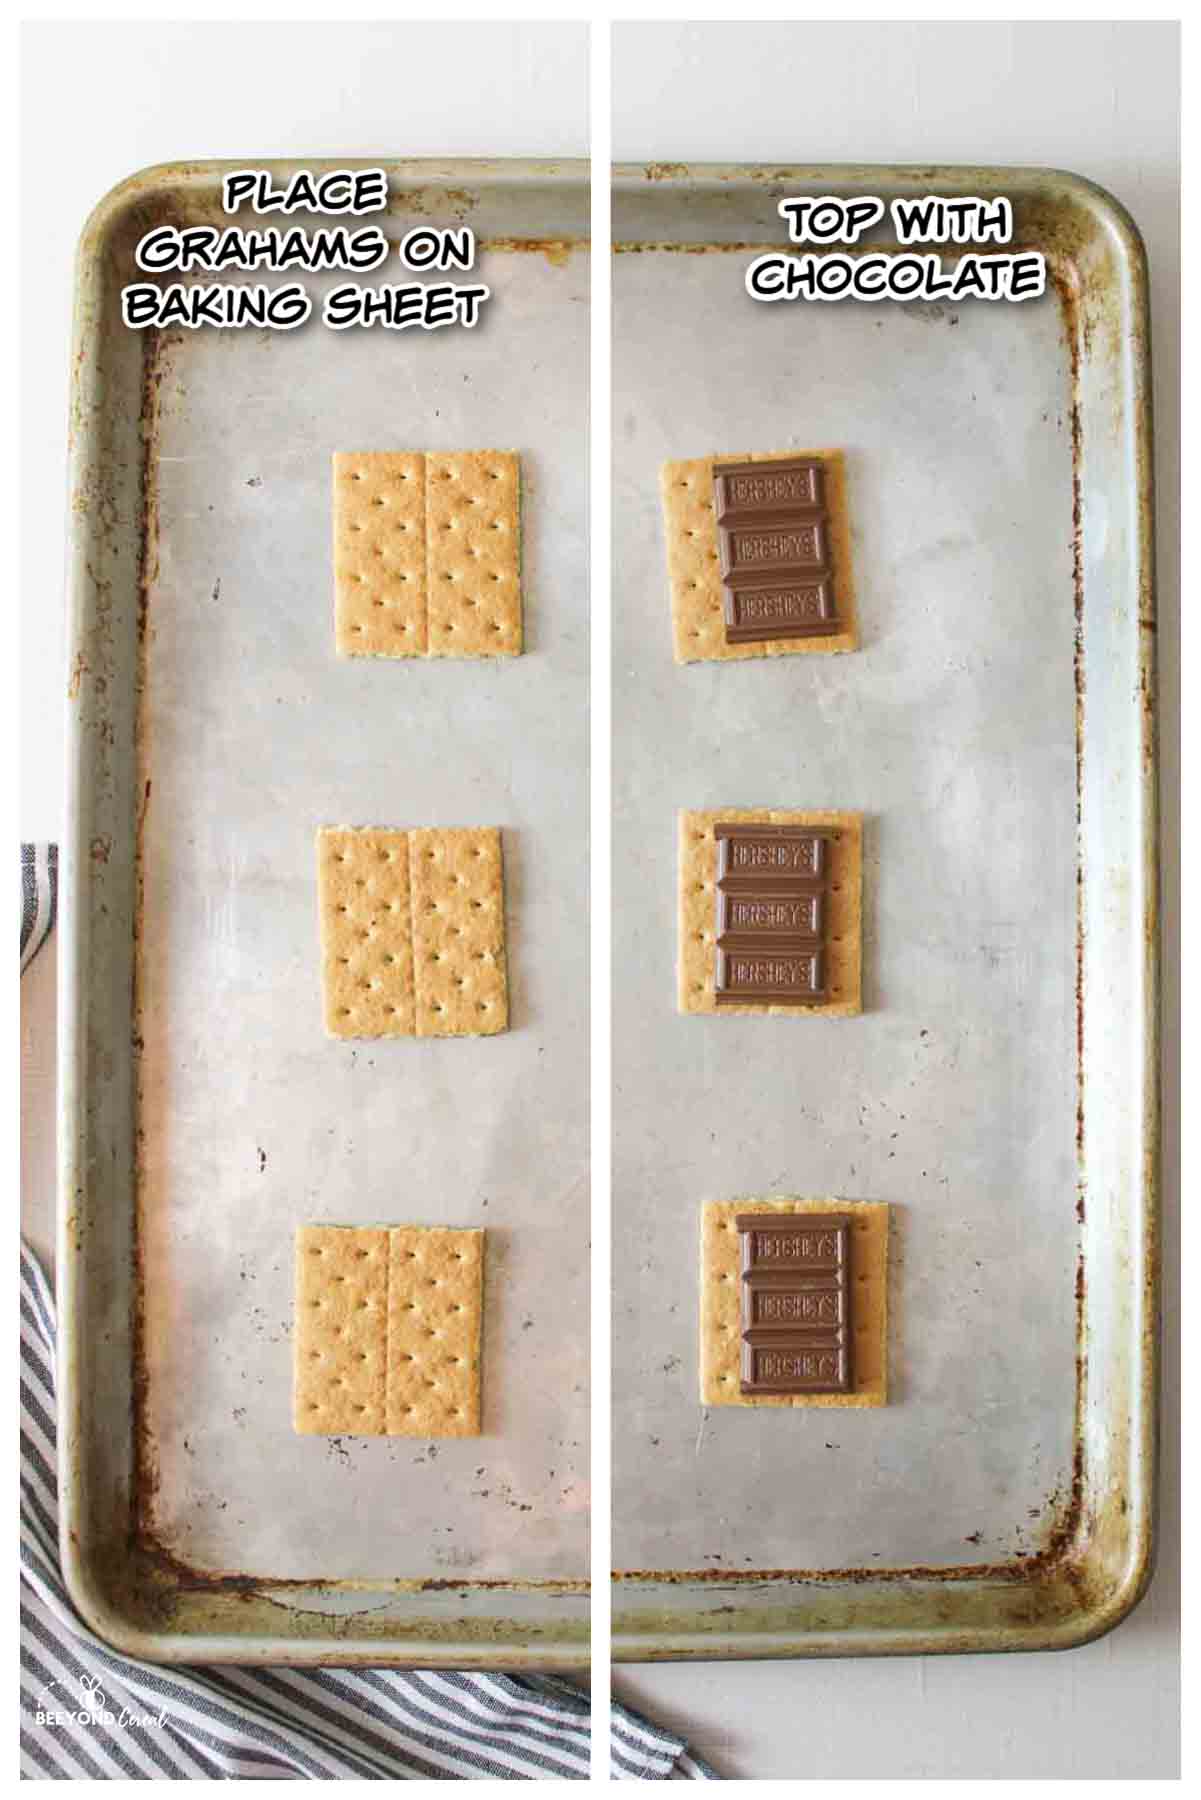 illustrated steos for making broiled smores, placing graham crackers on baking sheet and topping each with chocolate pieces